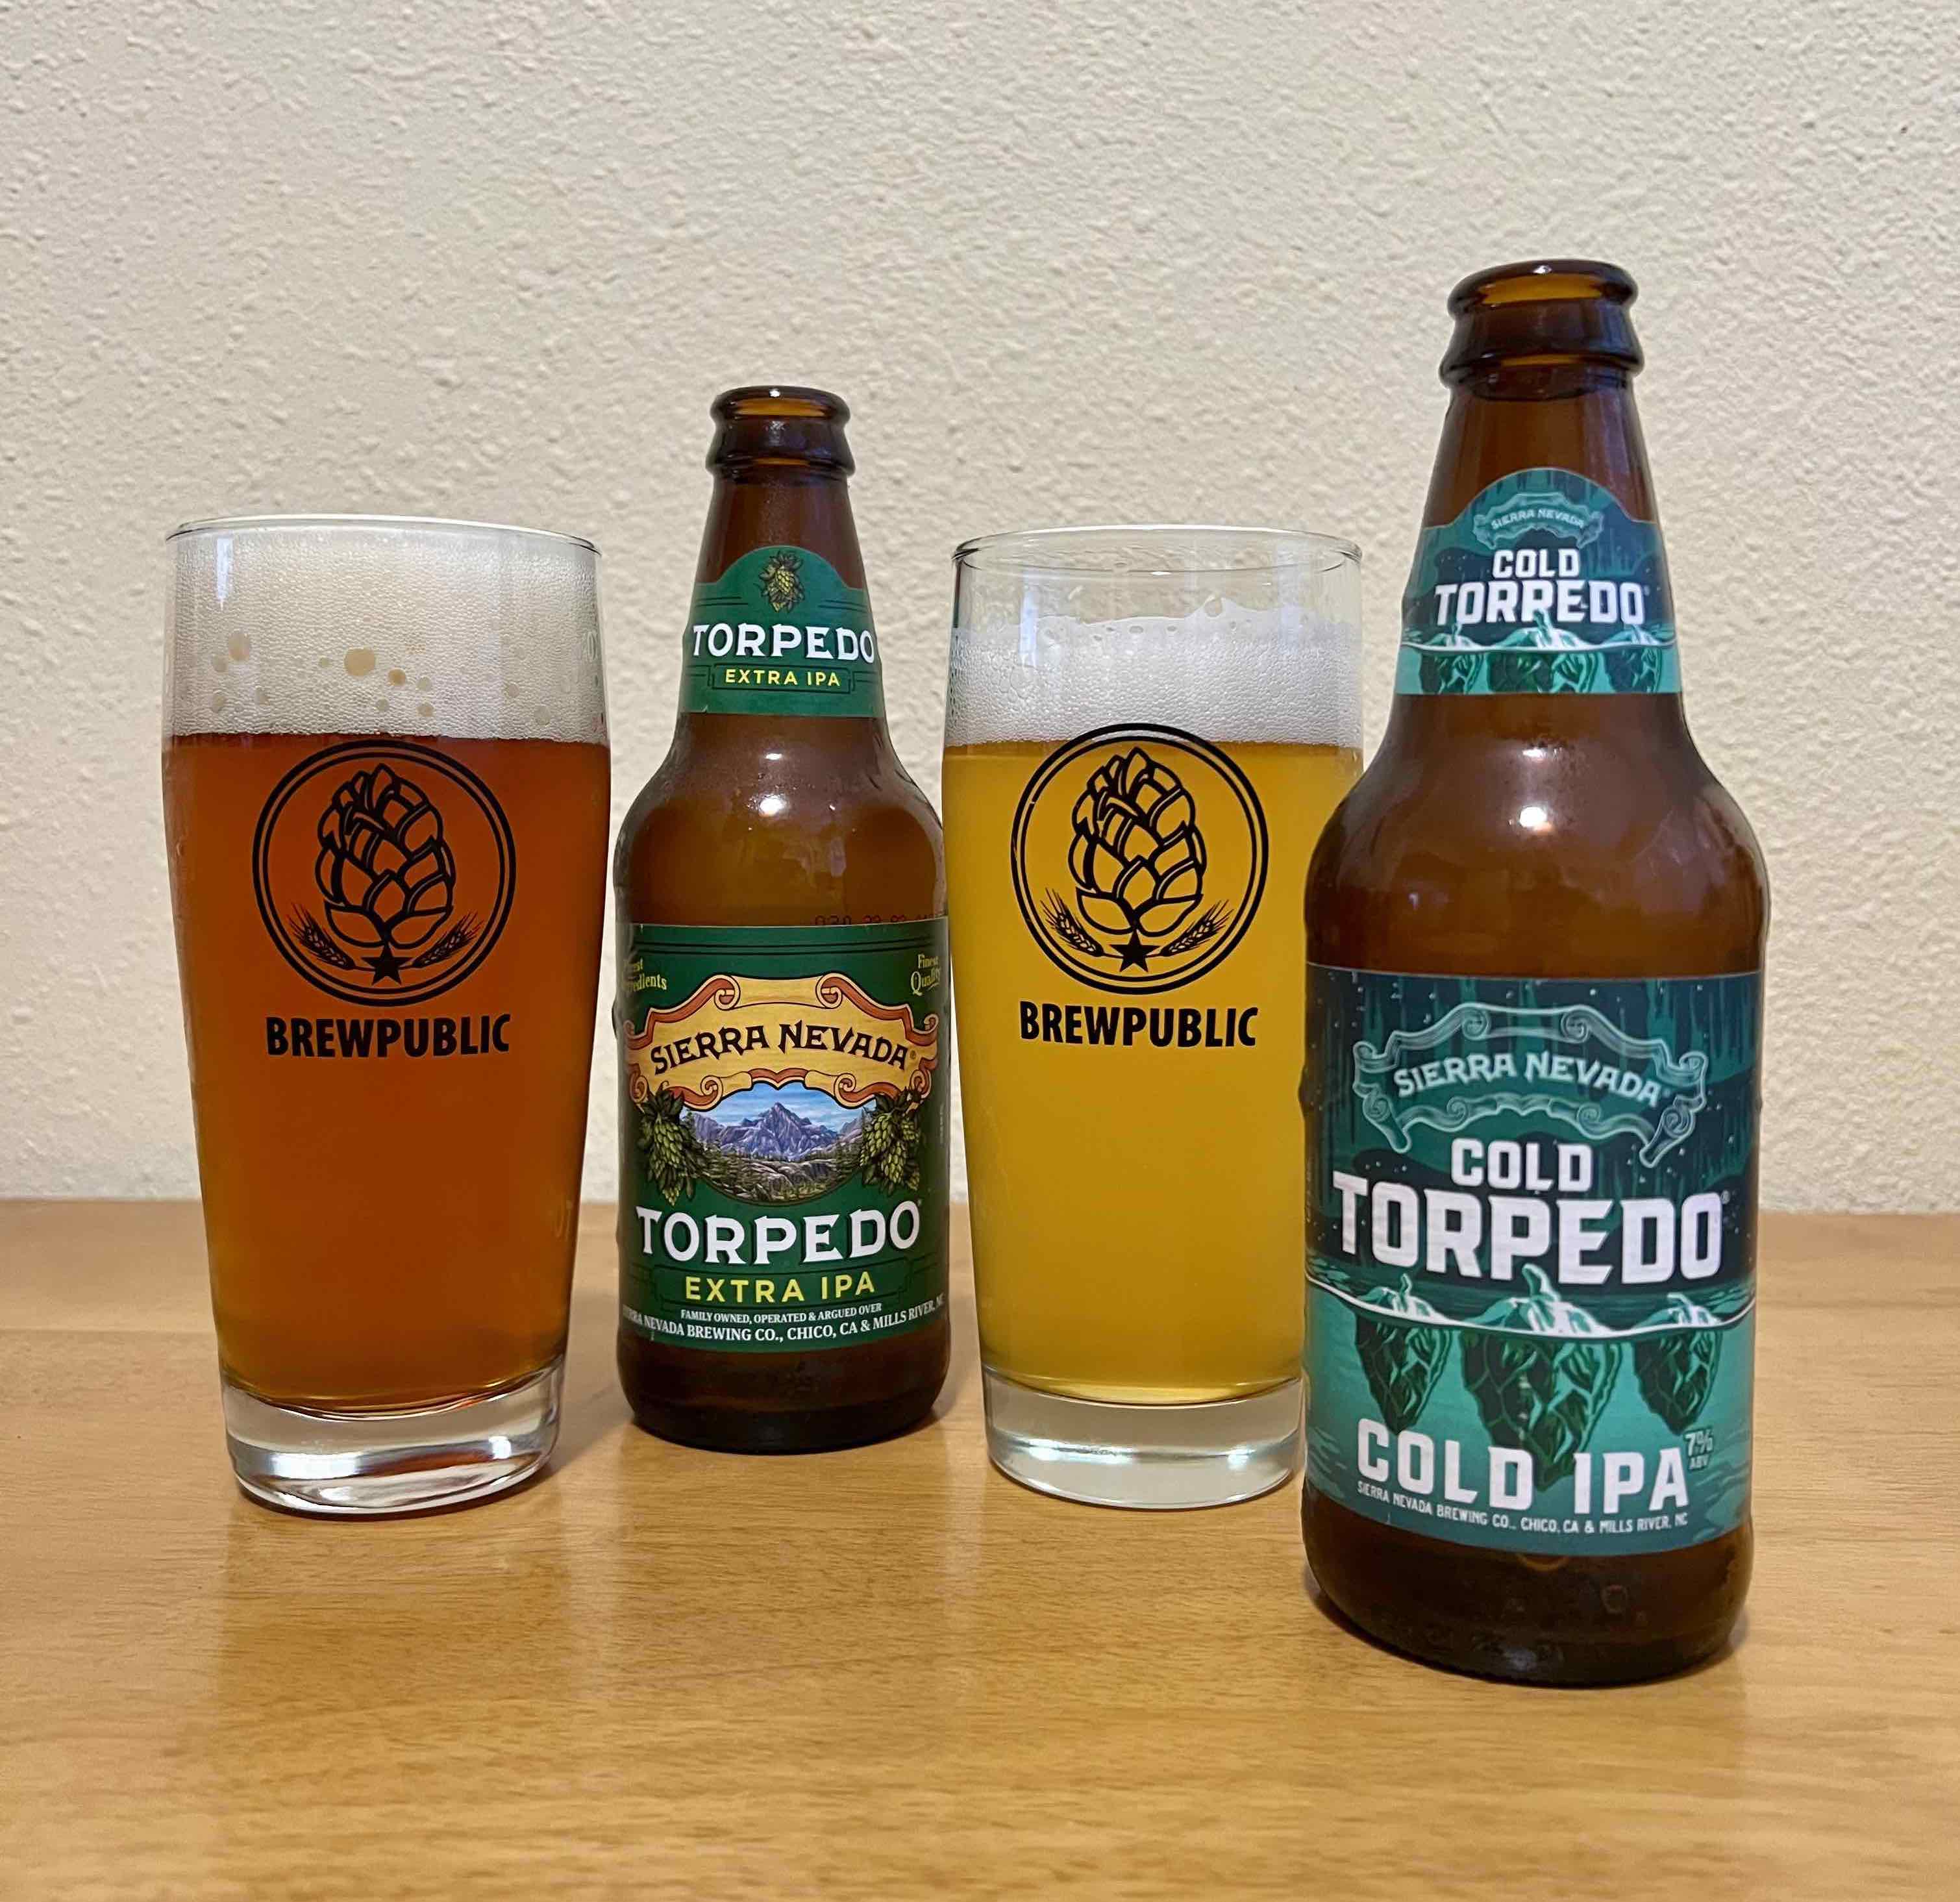 Sierra Nevada Brewing has released Cold Torpedo IPA that's a take on the Classic Torpedo Extra IPA.